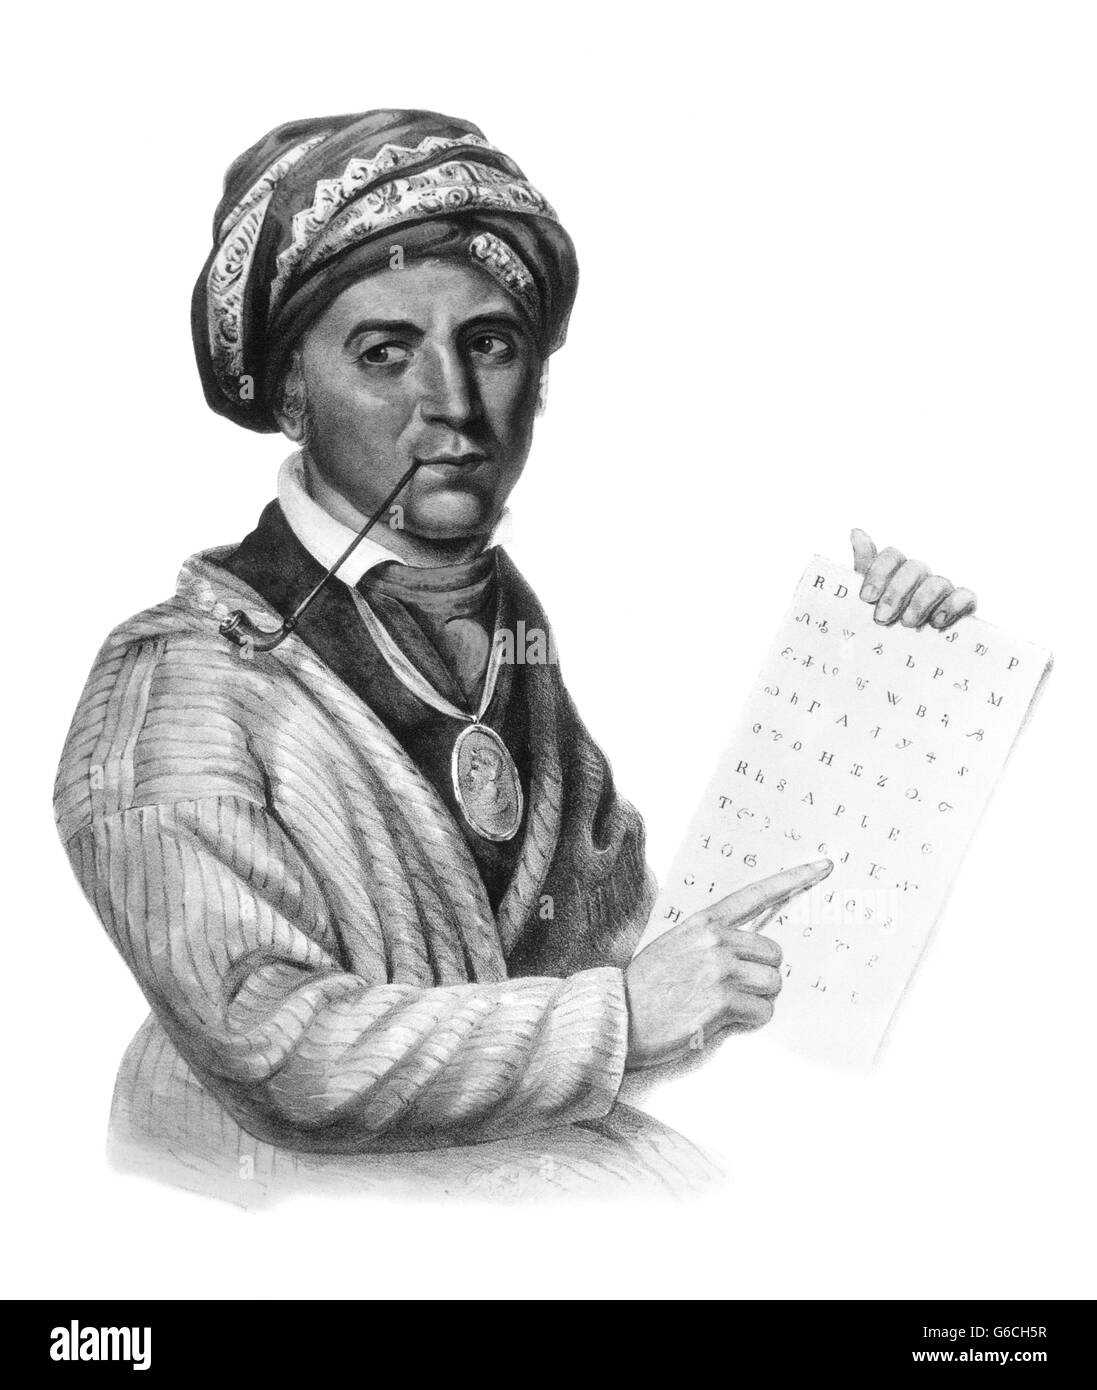 1790s 1800s PORTRAIT OF SEQUOYAH FAMOUS CHEROKEE INDIAN WHO INVENTED CHEROKEE SYLLABARY FROM PAINTING BY CHARLES BIRD KING Stock Photo